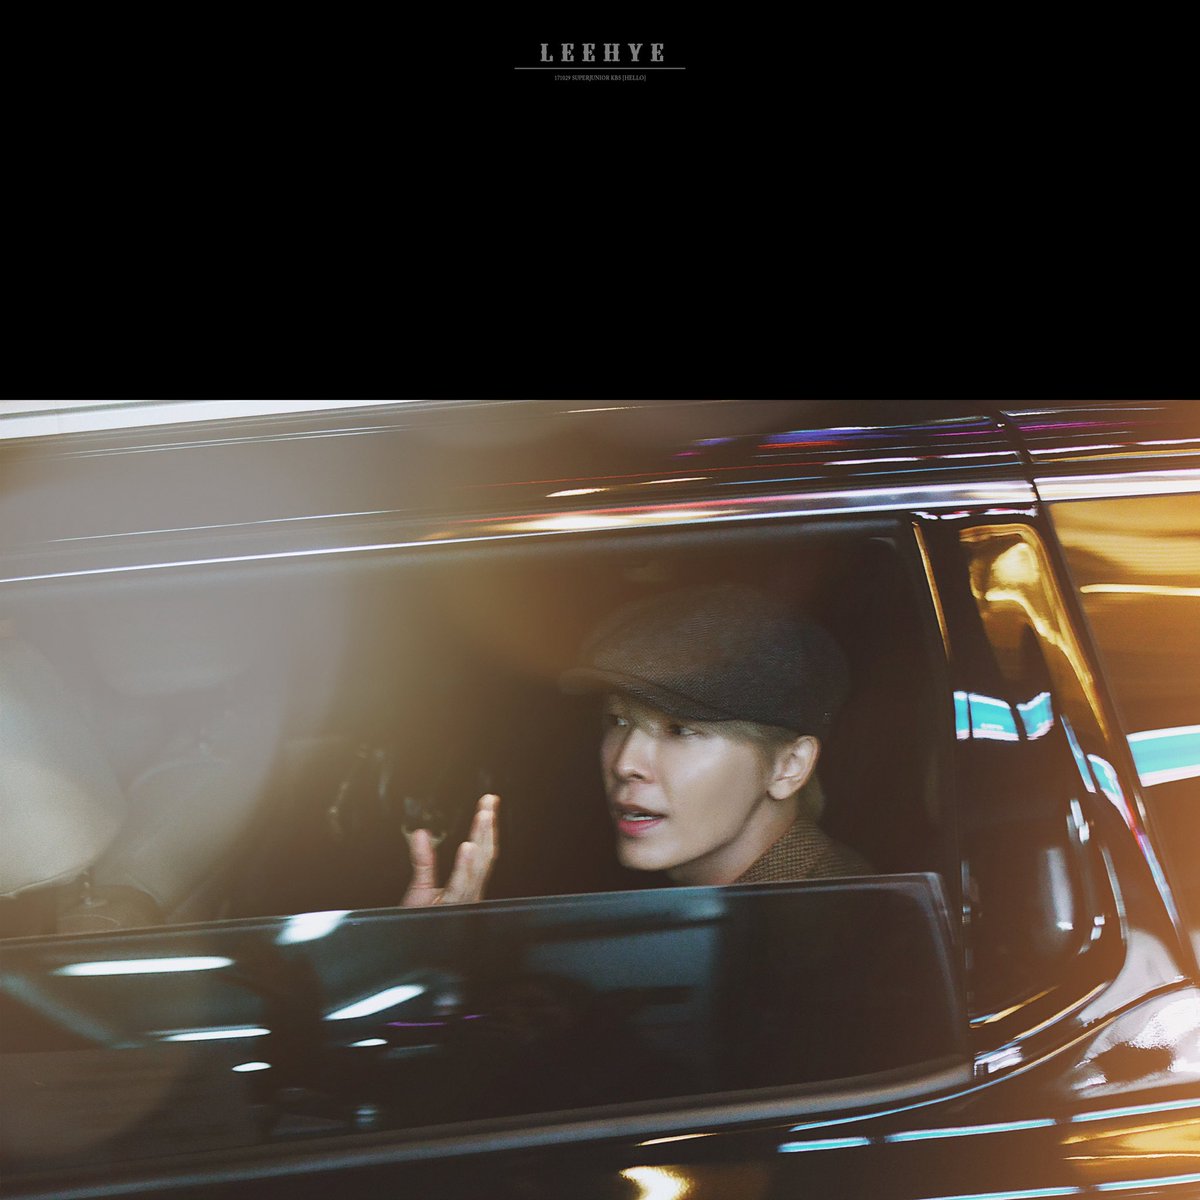 Donghae waving/looking at fans from the car's window ~ a thread